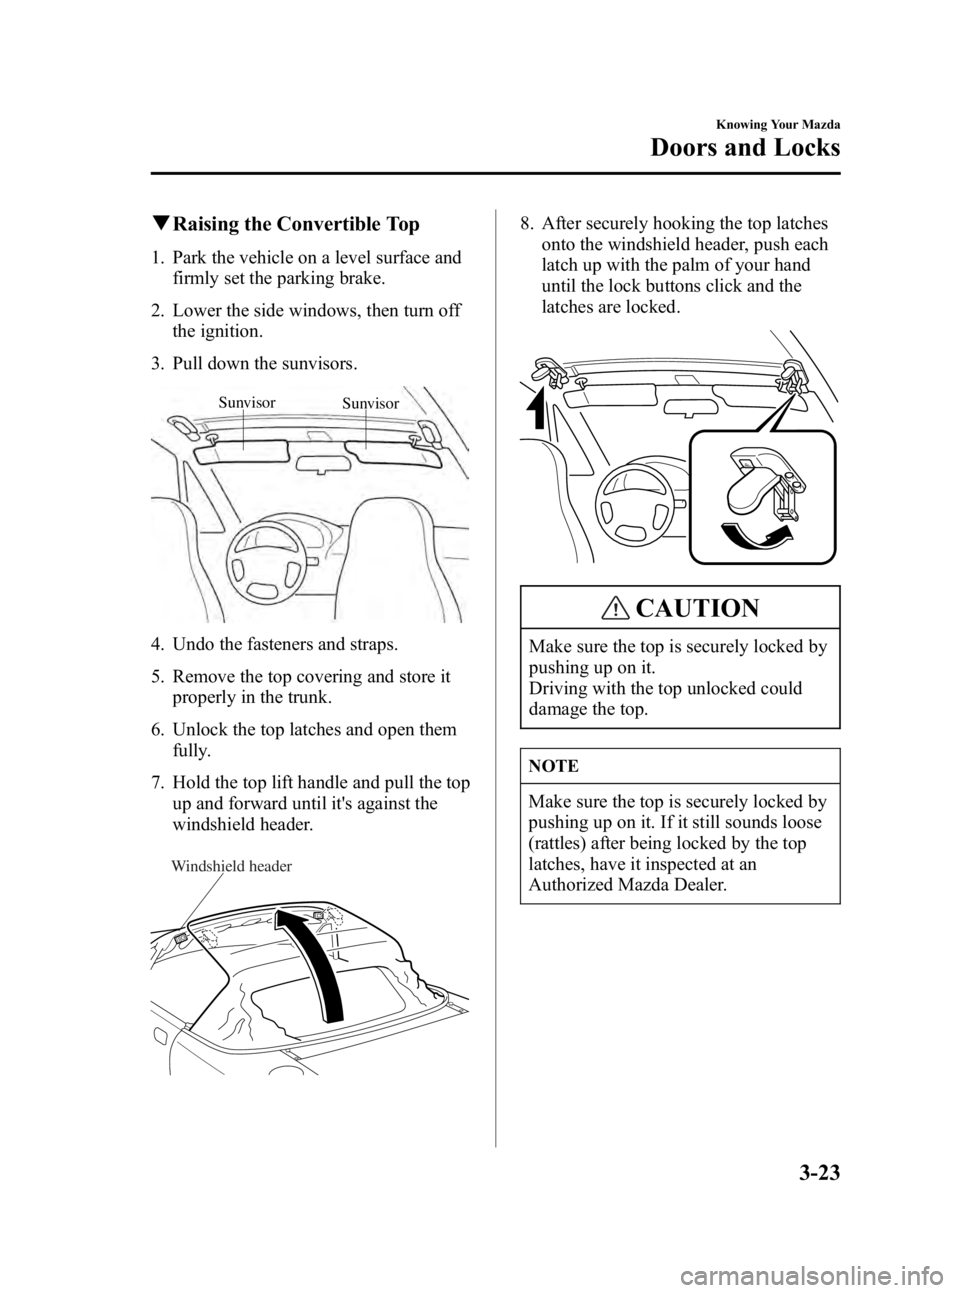 MAZDA MODEL MX-5 MIATA 2005  Owners Manual Black plate (65,1)
qRaising the Convertible Top
1. Park the vehicle on a level surface and
firmly set the parking brake.
2. Lower the side windows, then turn off the ignition.
3. Pull down the sunviso